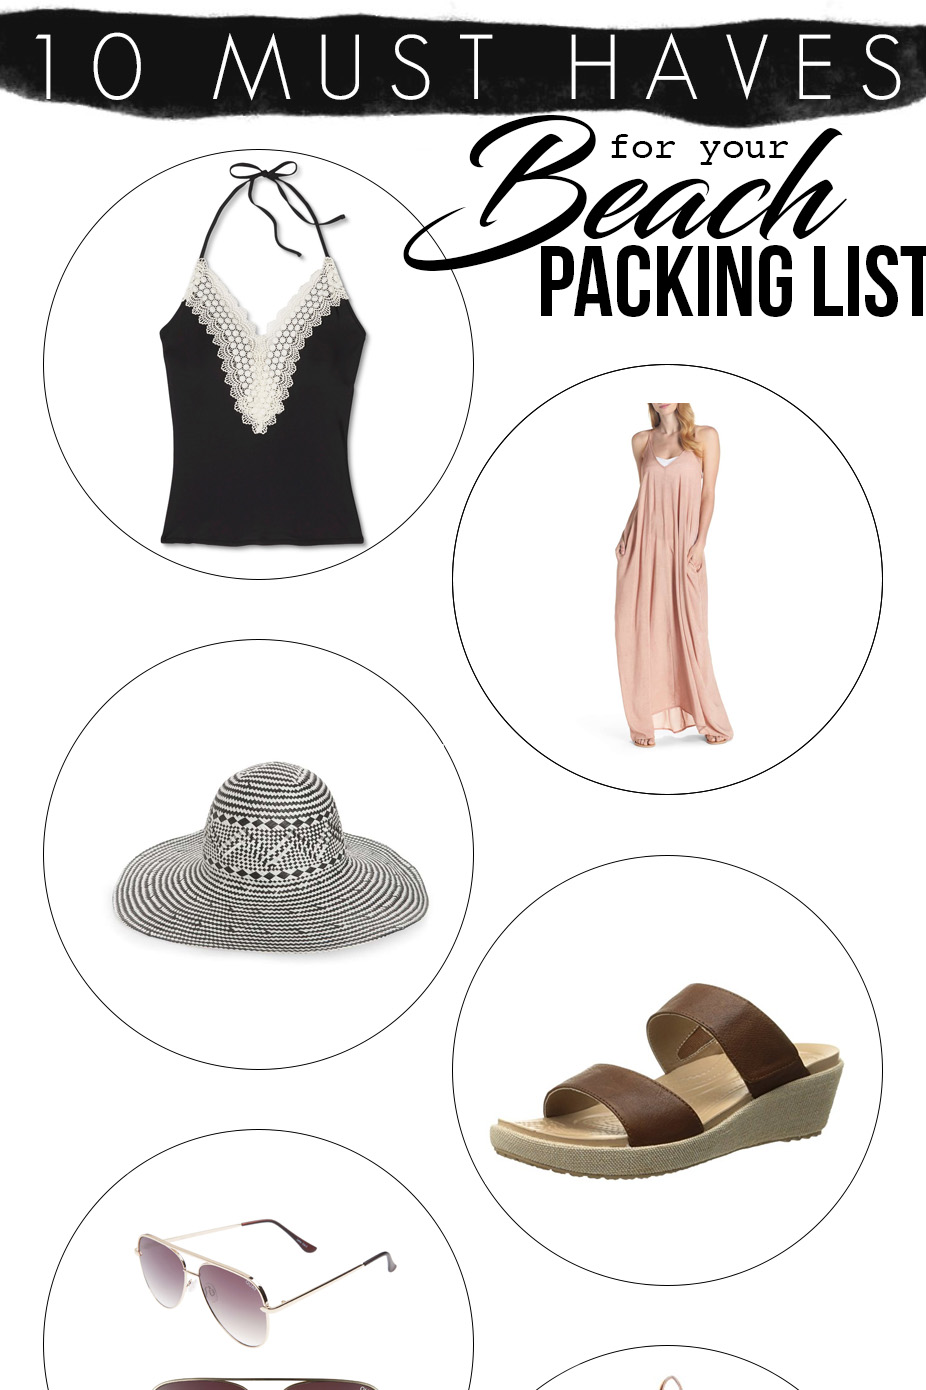 Are you planning a Beach vacation?? I have gathered up 10 Must Haves for your Beach Packing List.